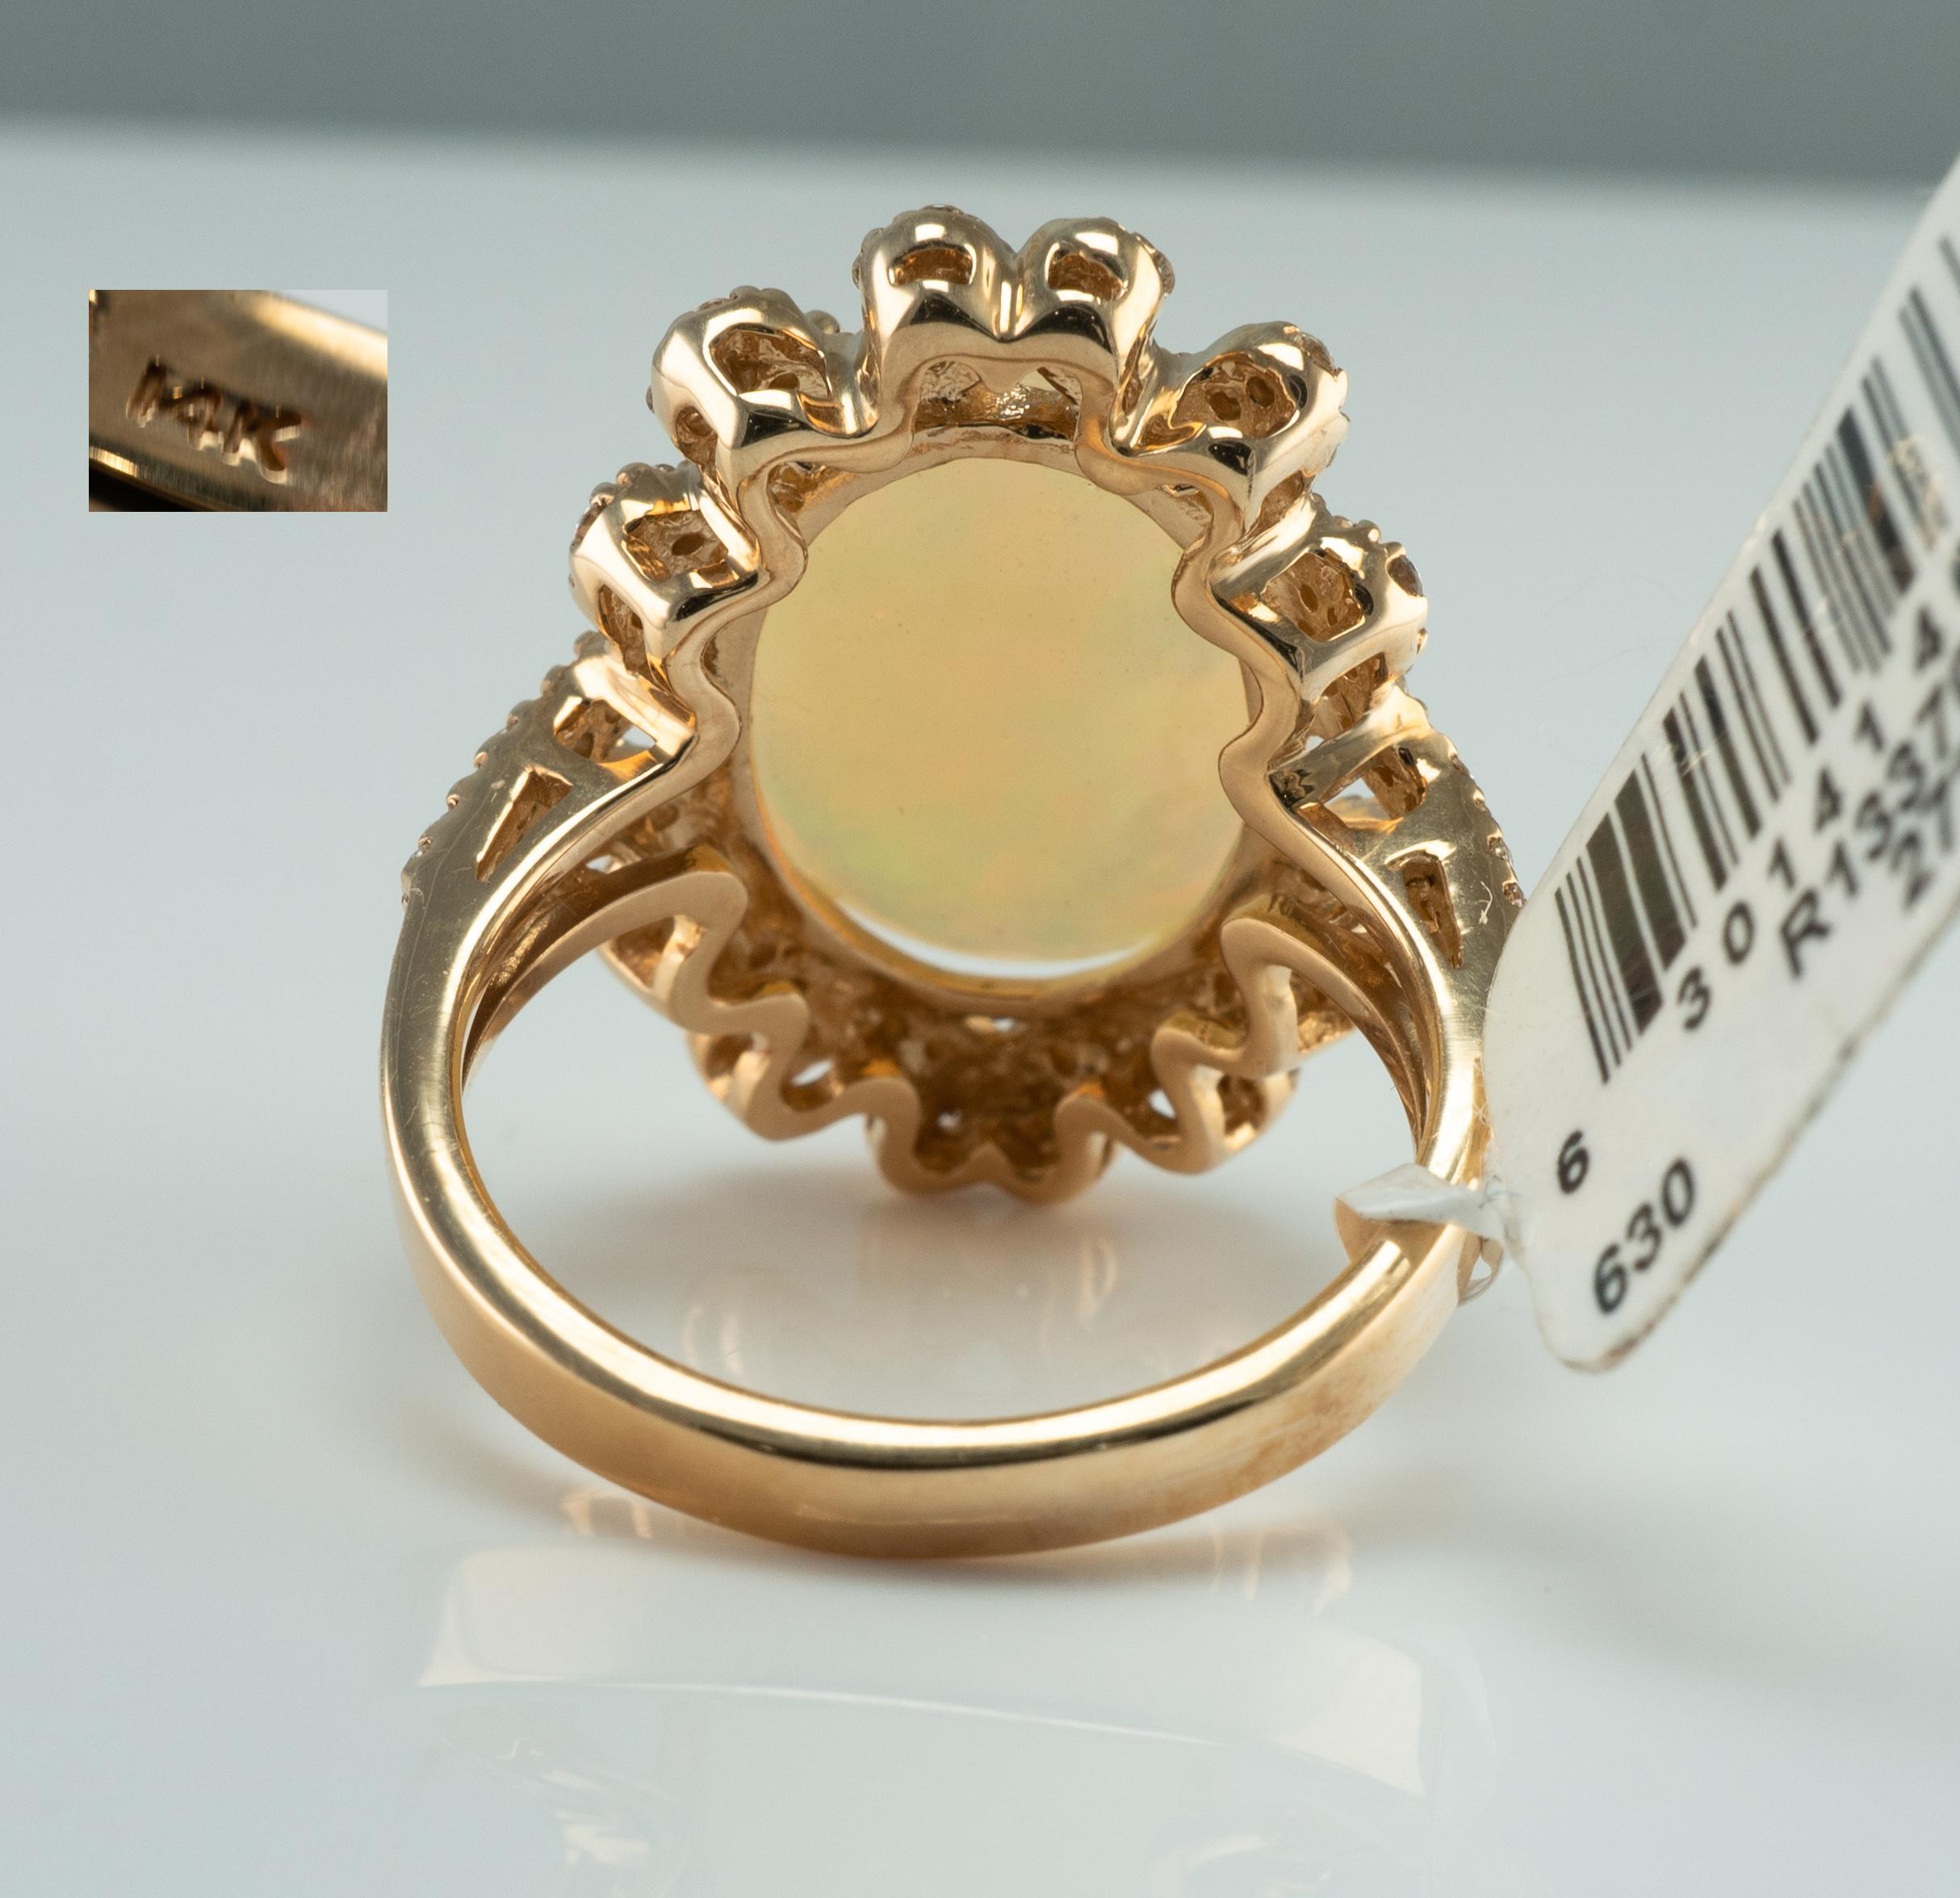 Natural Opal Diamond Ring 14K Gold Estate Retail Tag $8400 For Sale 1